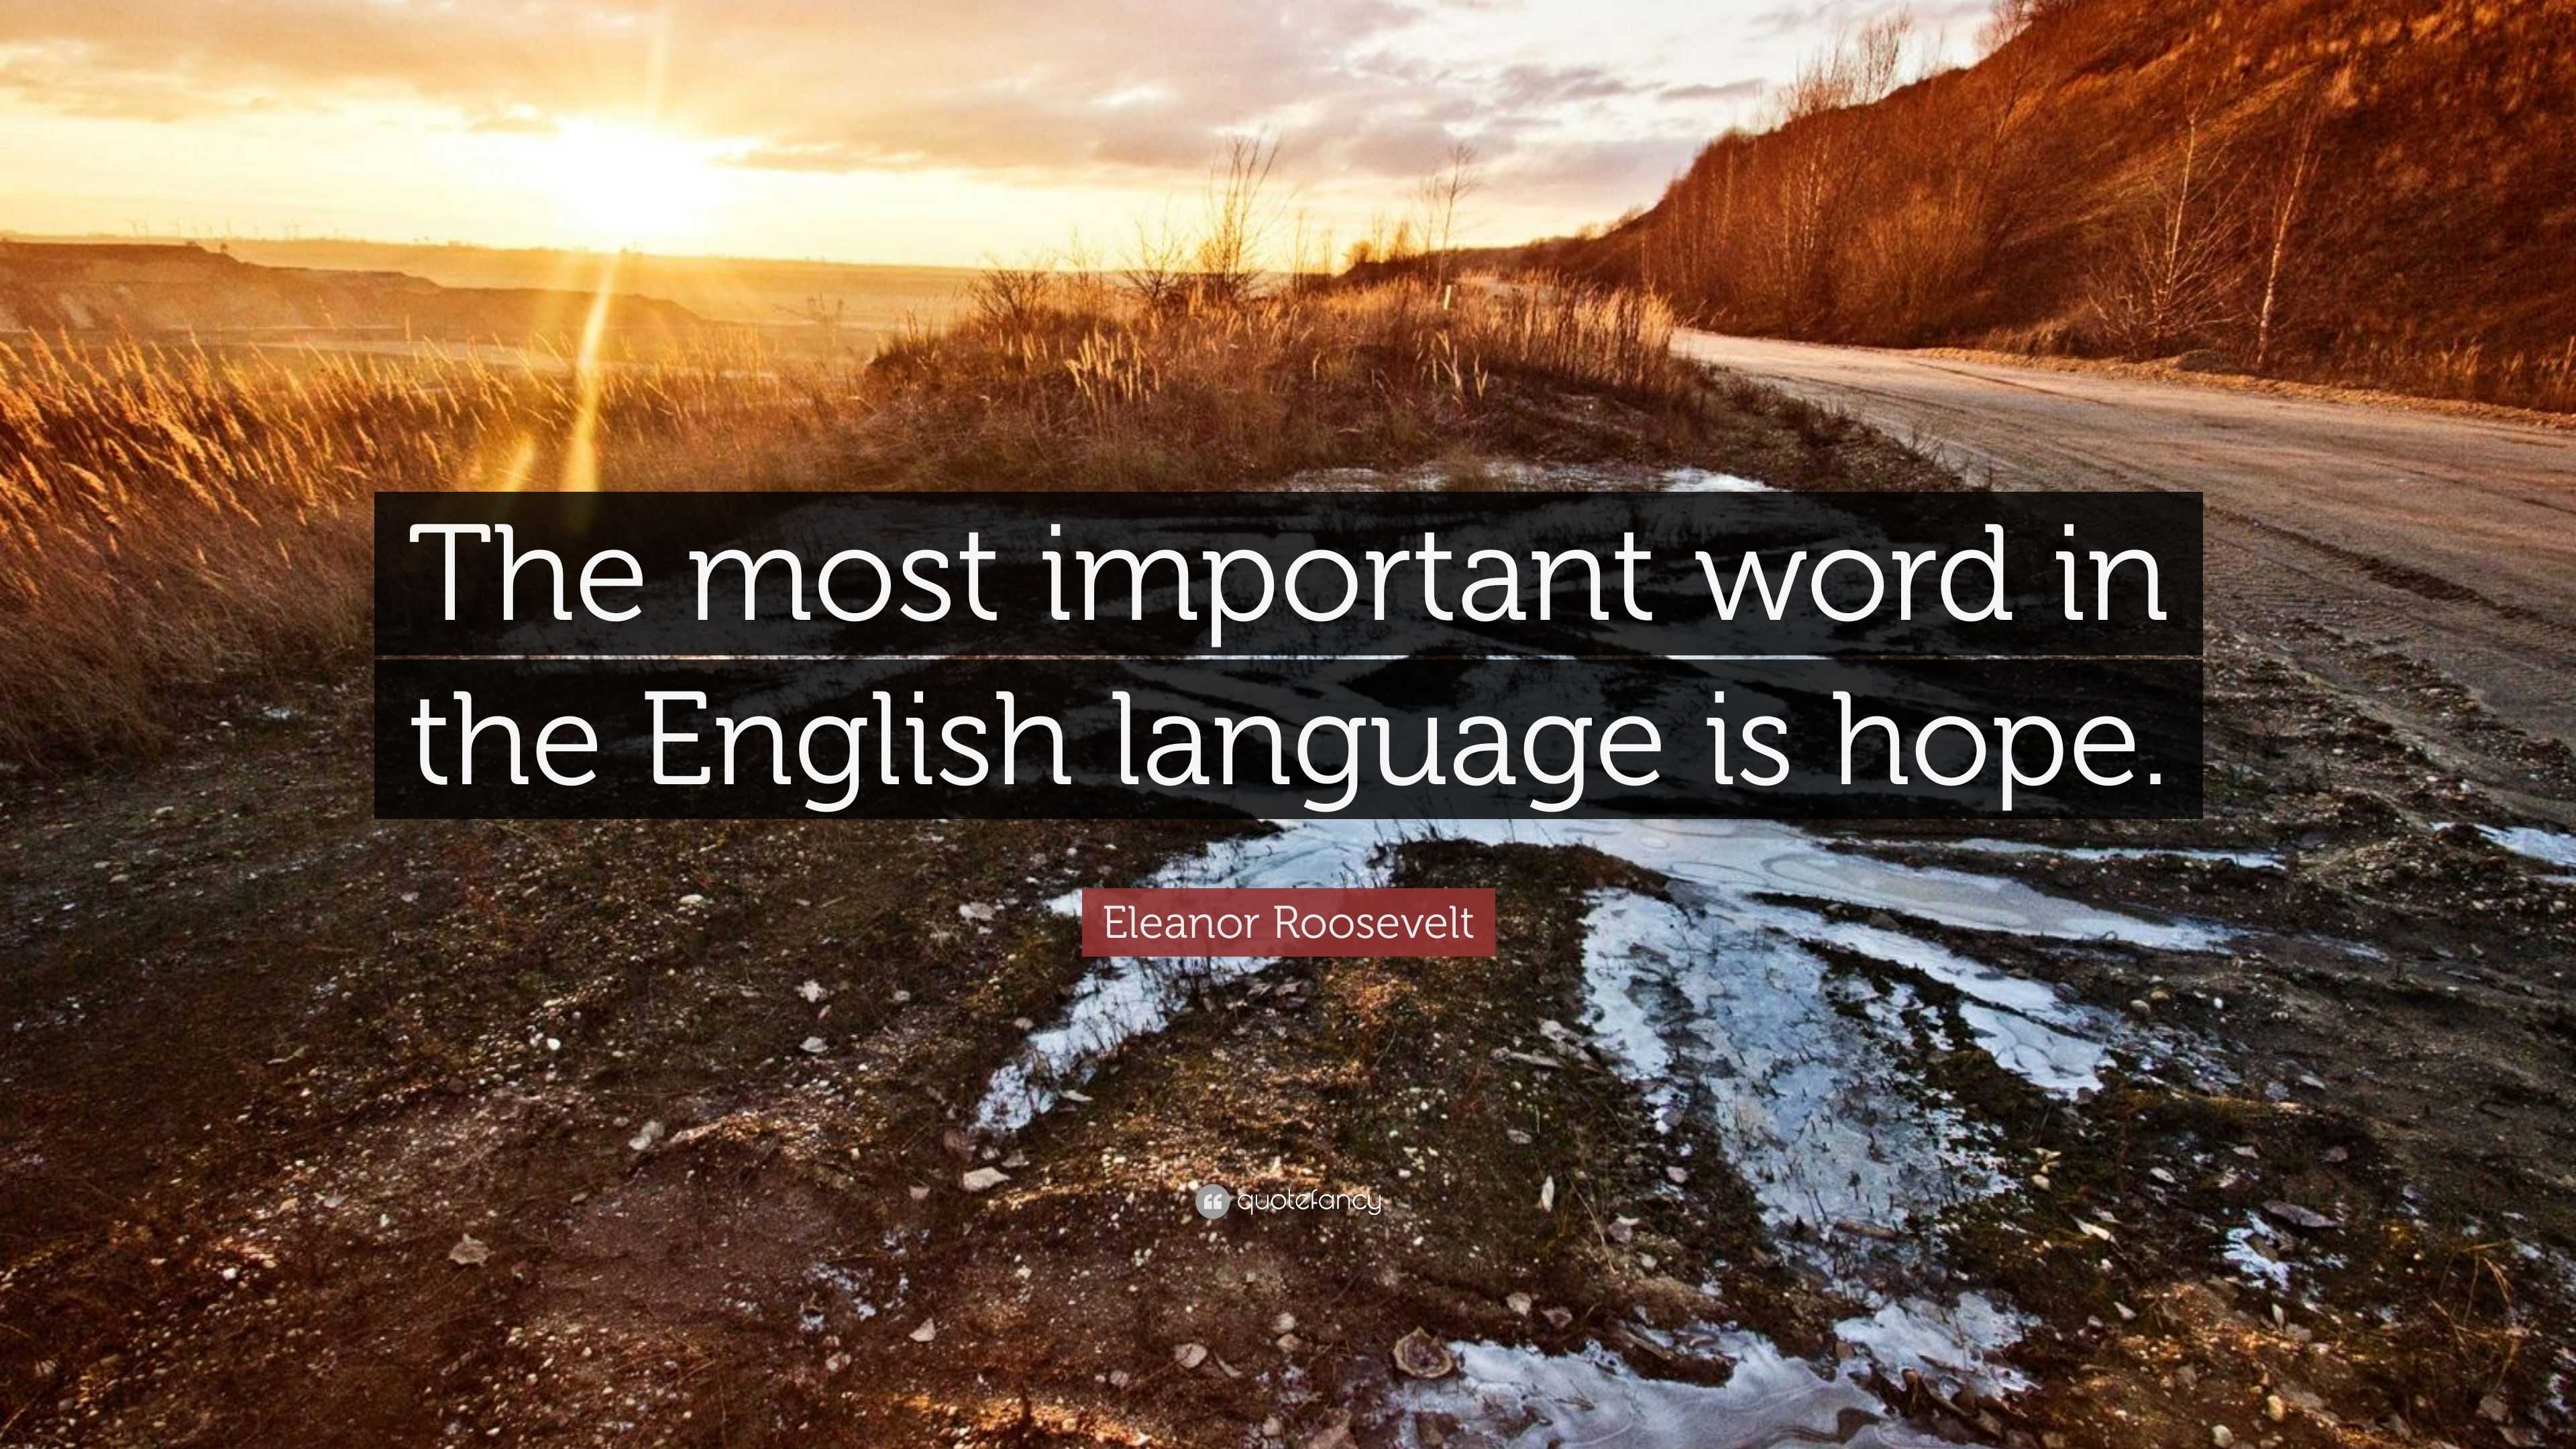 Eleanor Roosevelt Quote: “The most important word in the English ...